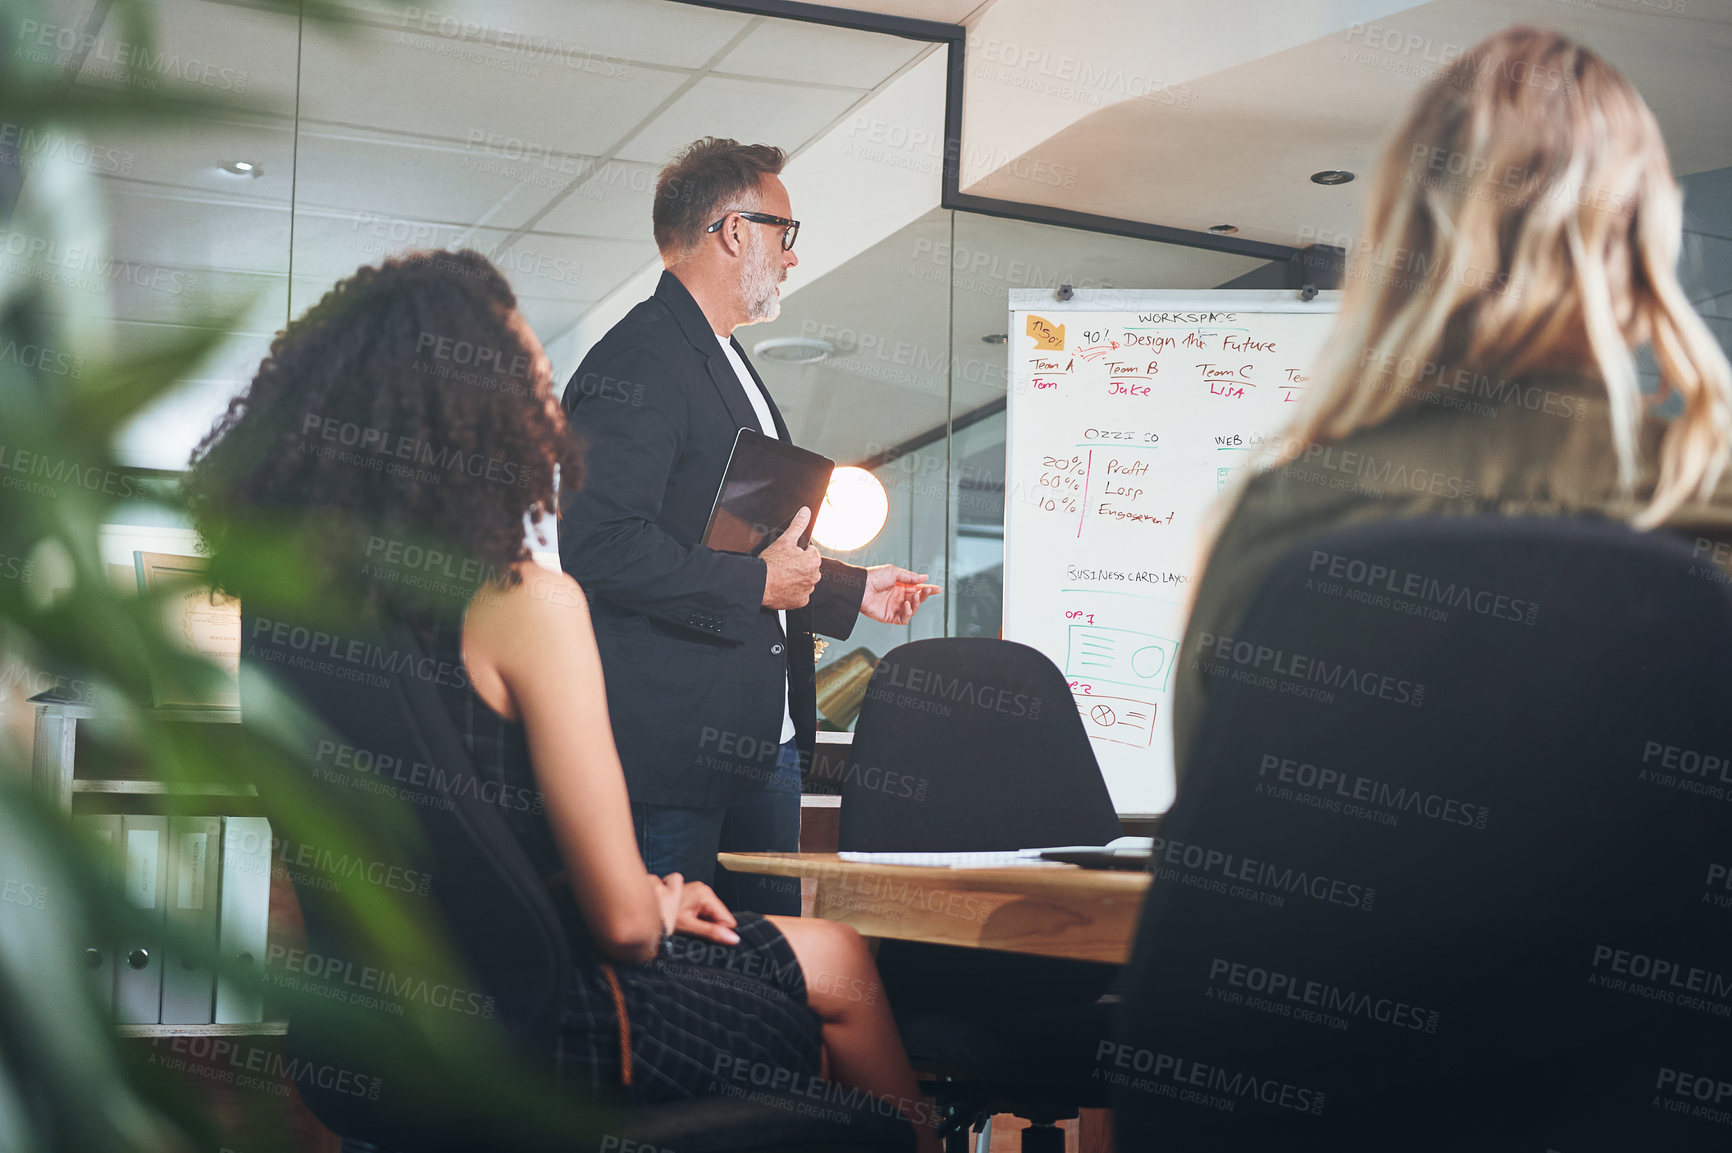 Buy stock photo Shot of a mature businessman delivering a presentation in the boardroom of a modern office